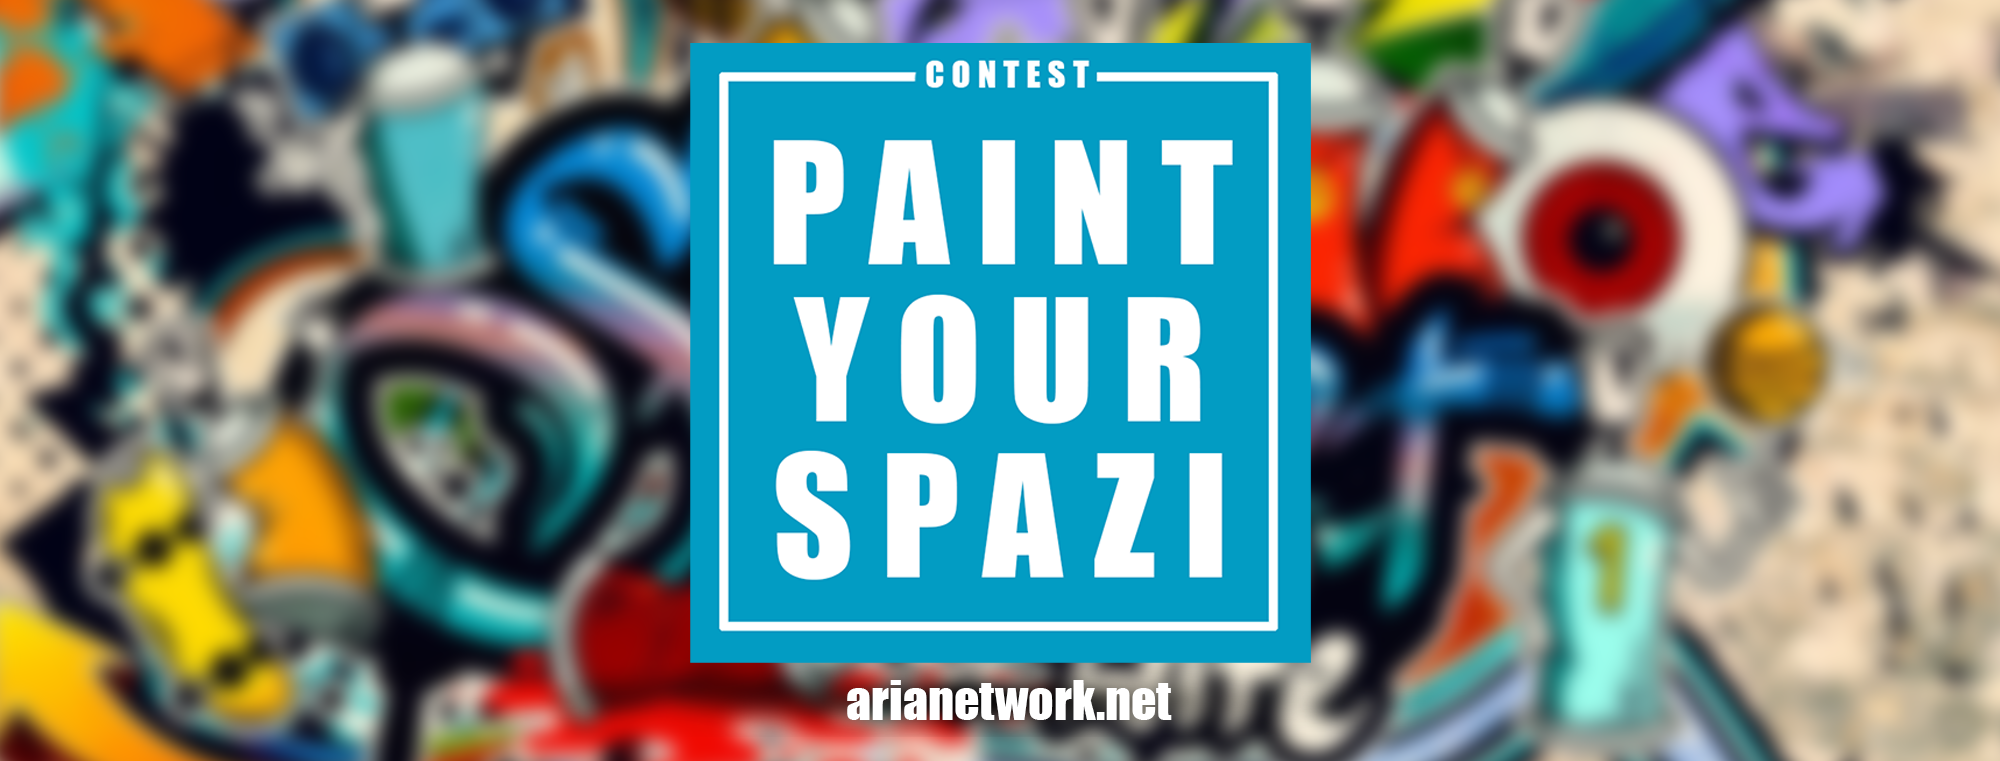 immagine contest paint yout spazi